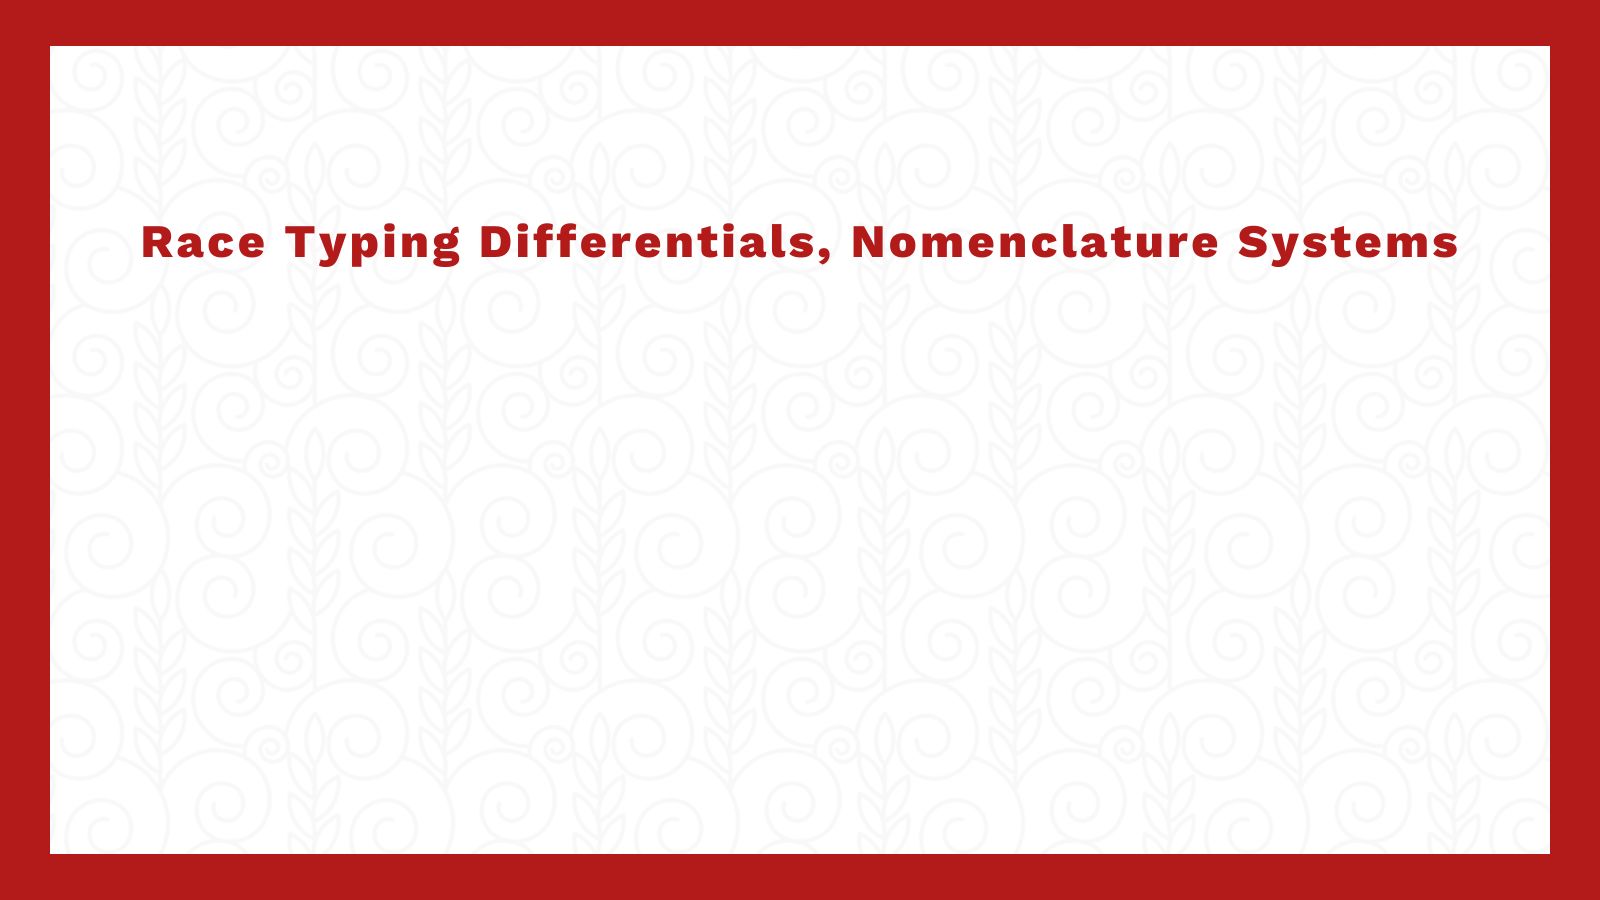 Race Typing Differentials, Nomenclature Systems